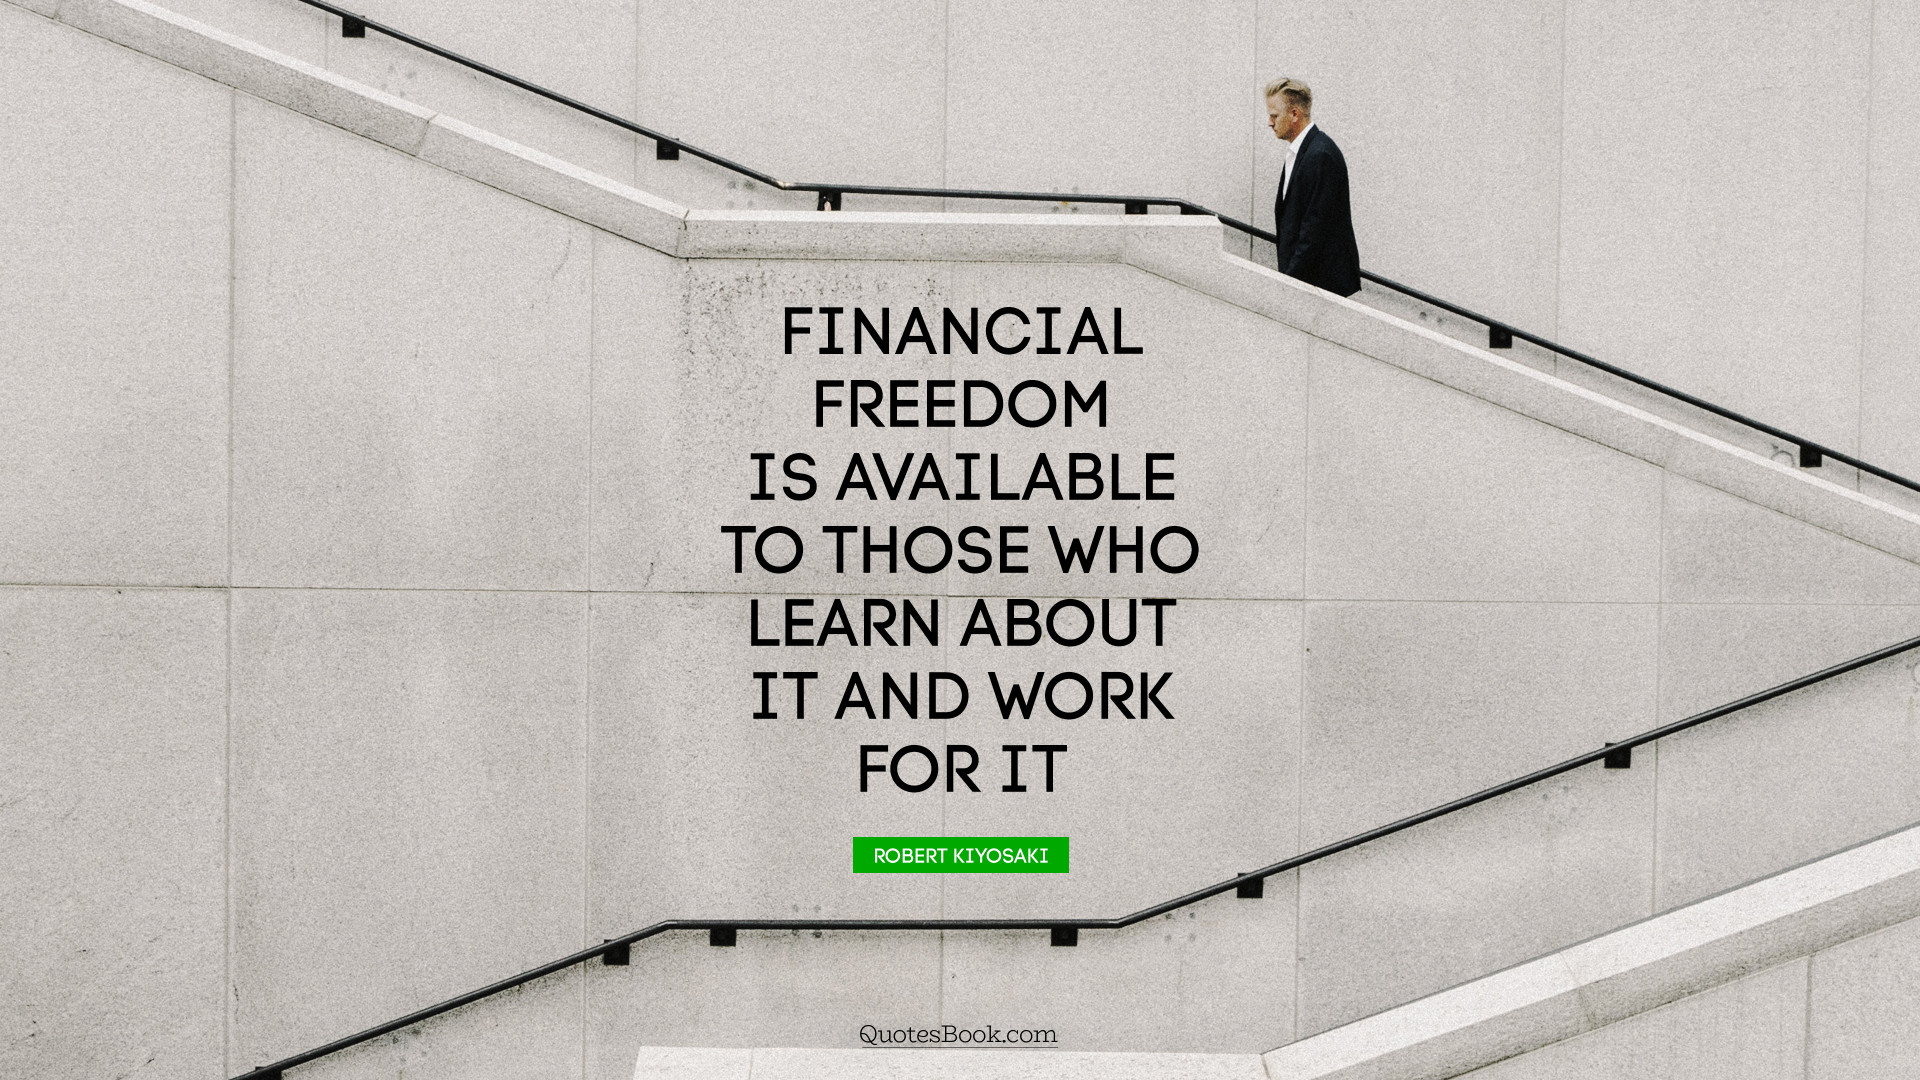 Financial freedom is available to those who learn about it and work for